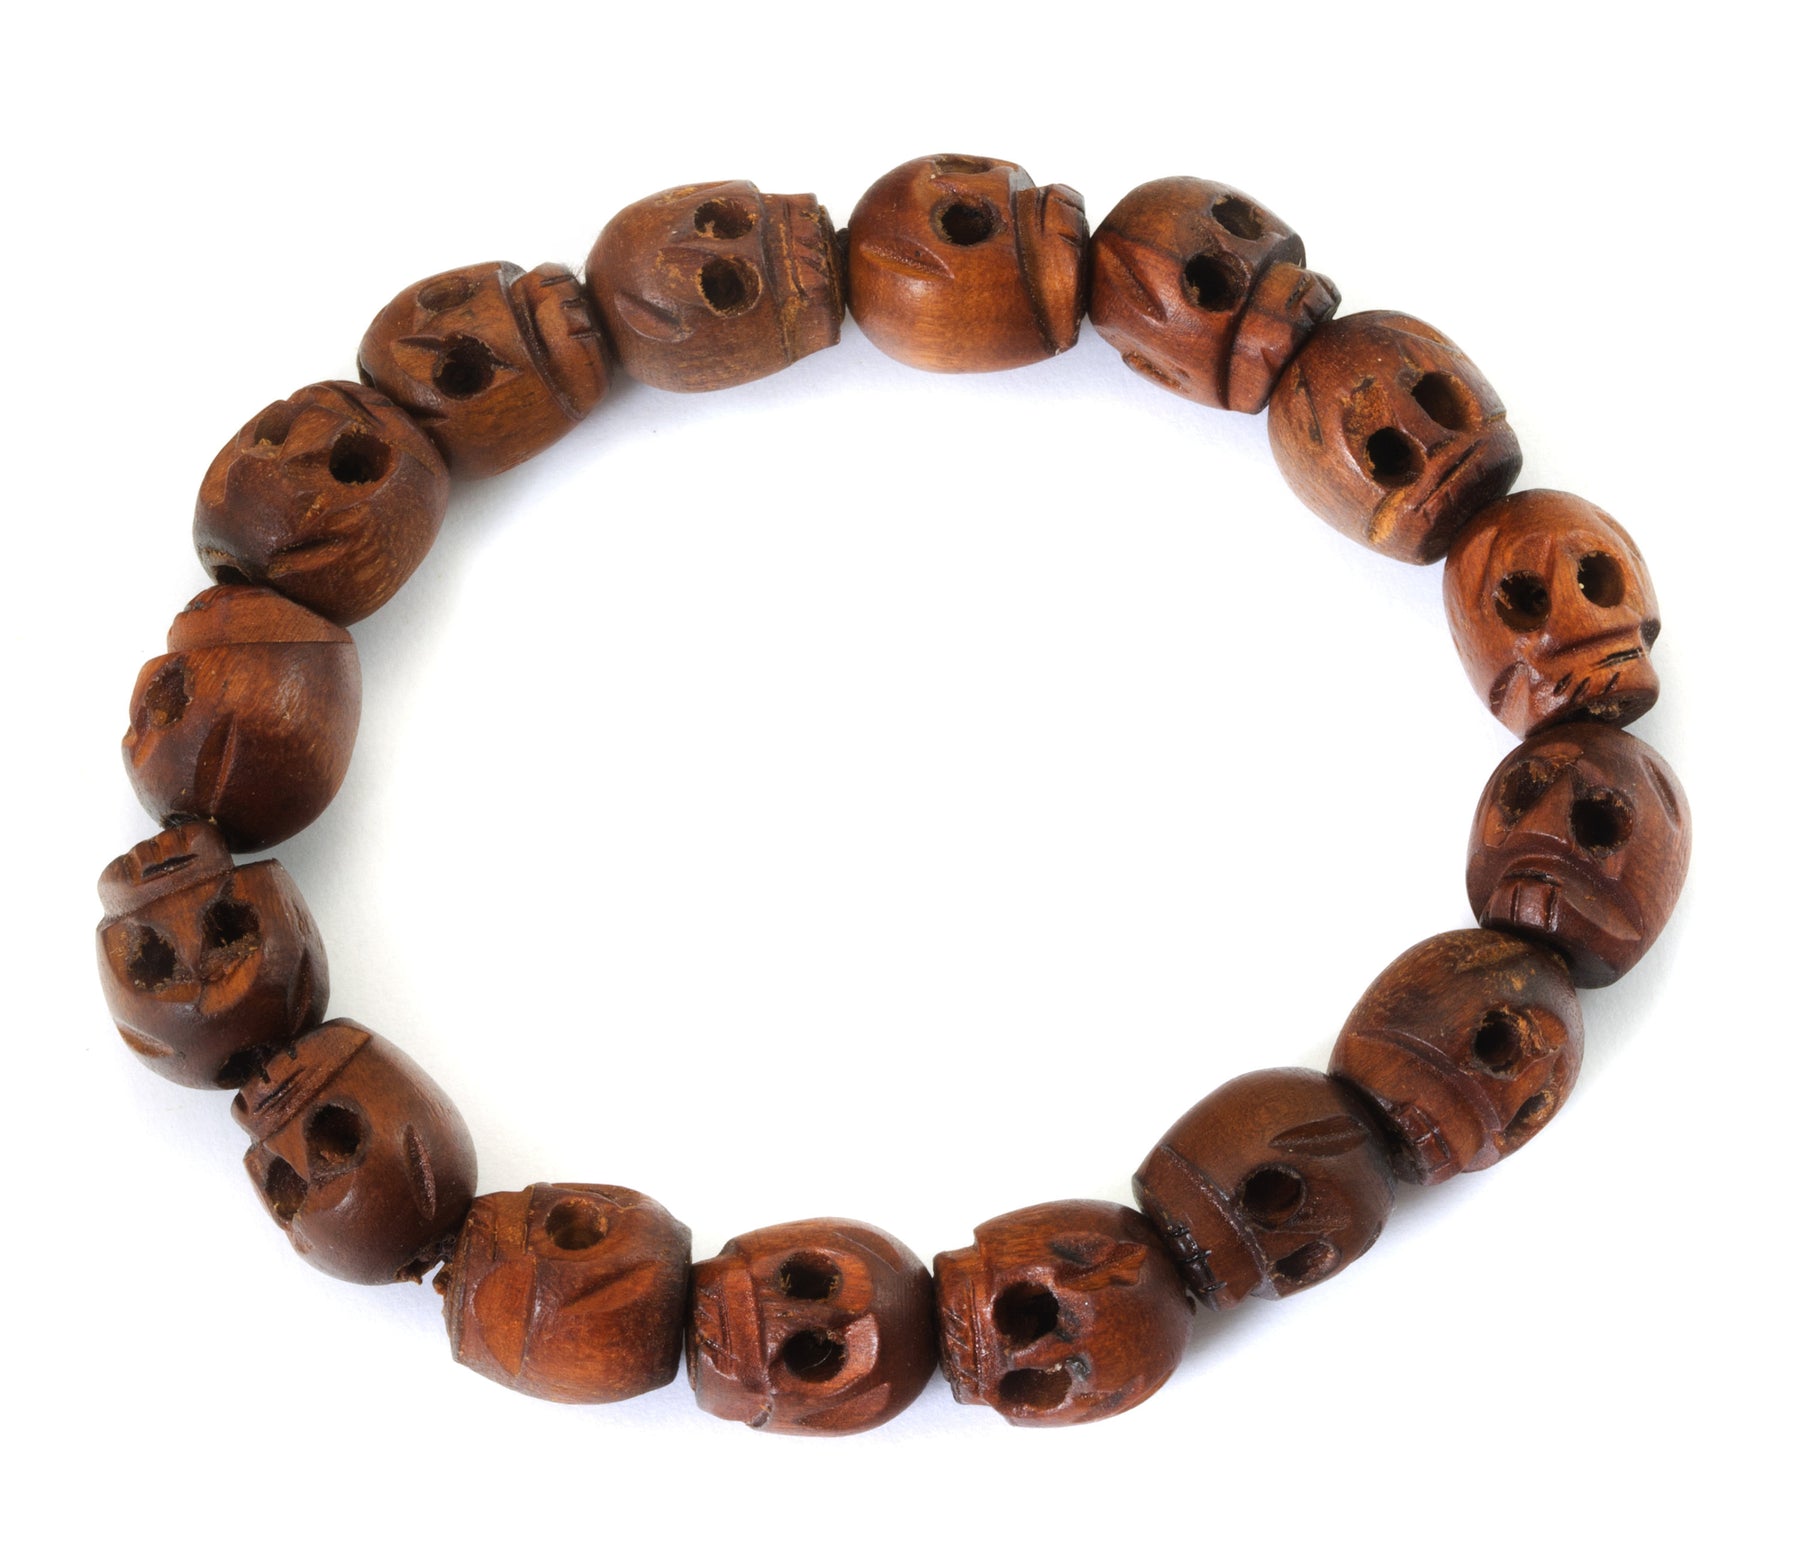 Amazon.com: Buddha Groove Handmade Adjustable Tibetan Skull Buddhist  Bracelet with Carved Wood and Bone Beads | Crafted in Nepal: Clothing,  Shoes & Jewelry